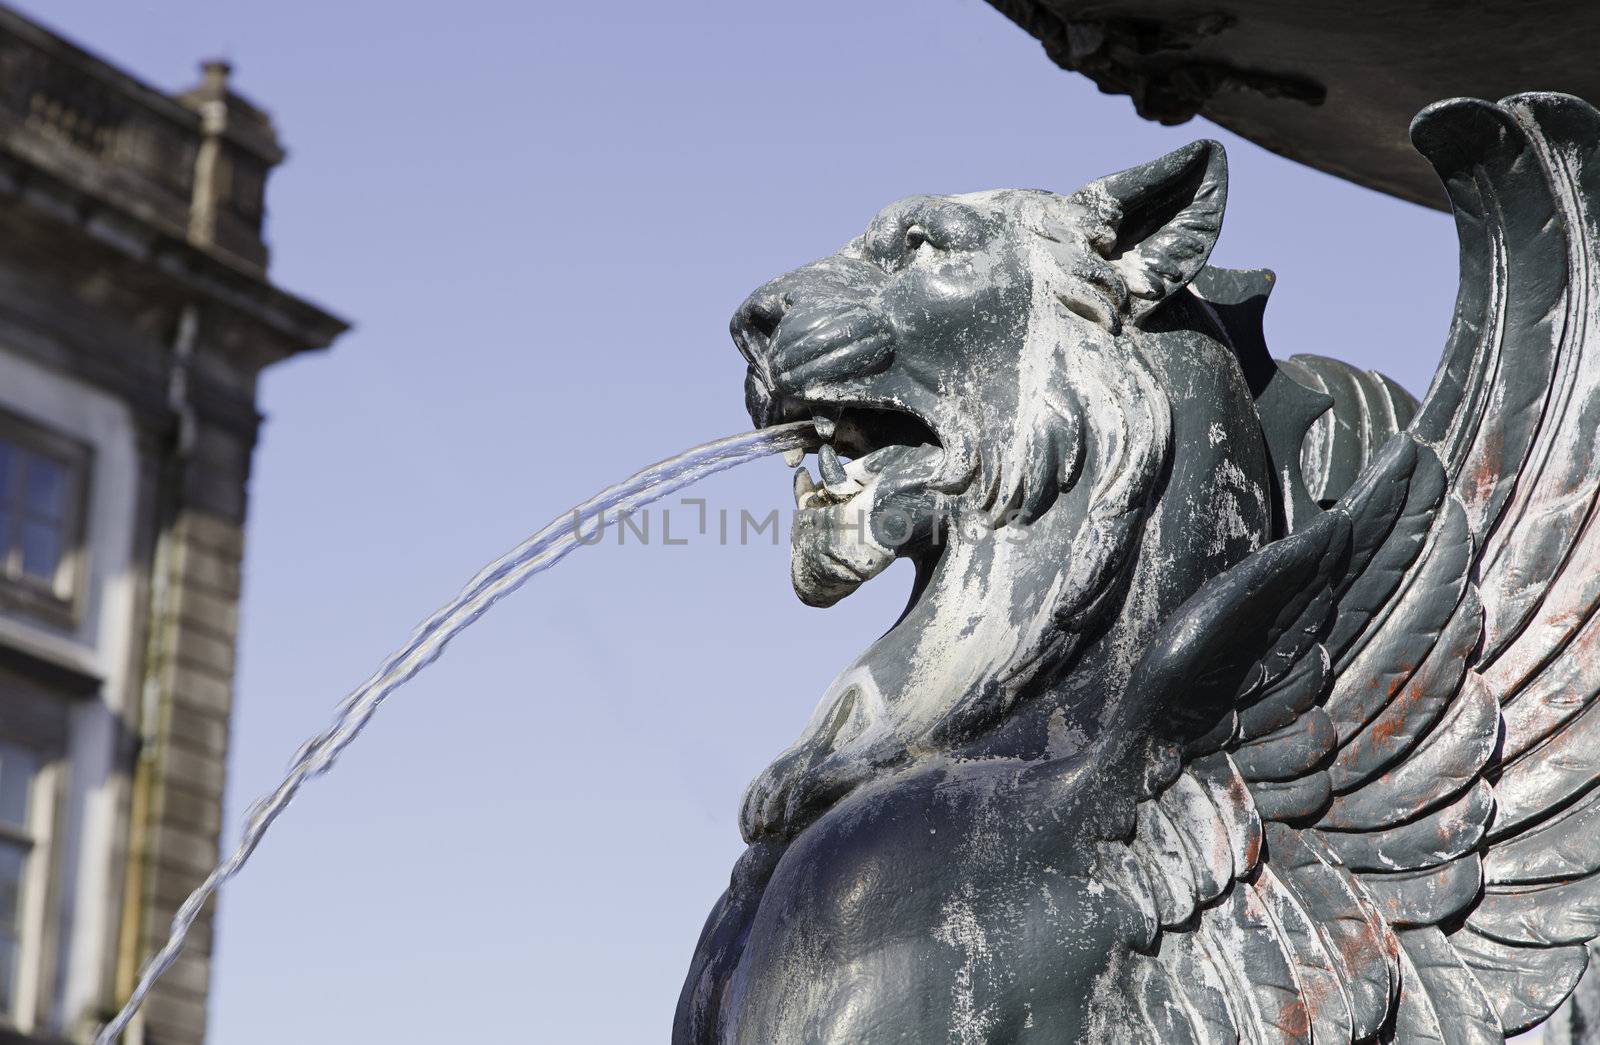 Lisbon ancient source, detail of a lion spitting water fountain